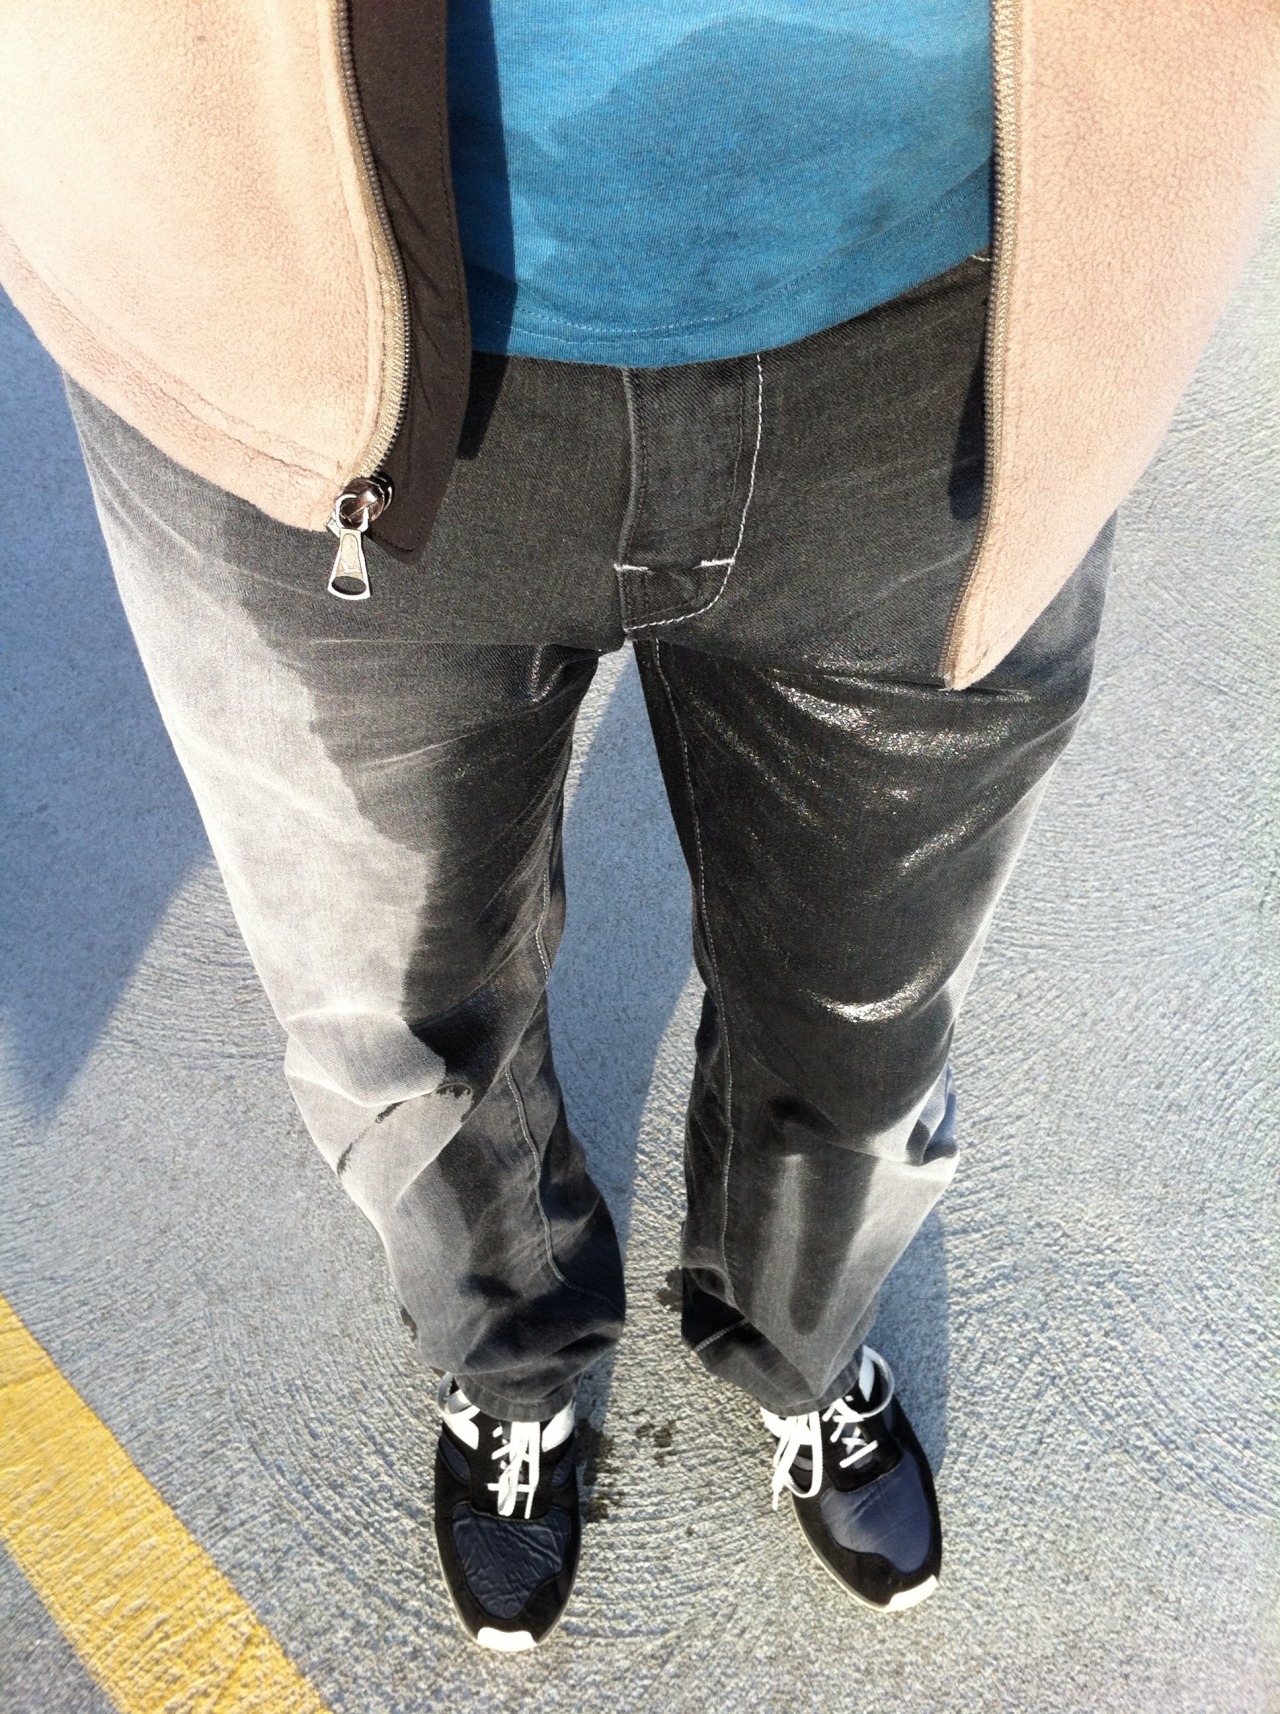 tattsandkink1:  soggypants2:  Rode the train wearing wet pants, and totally lost